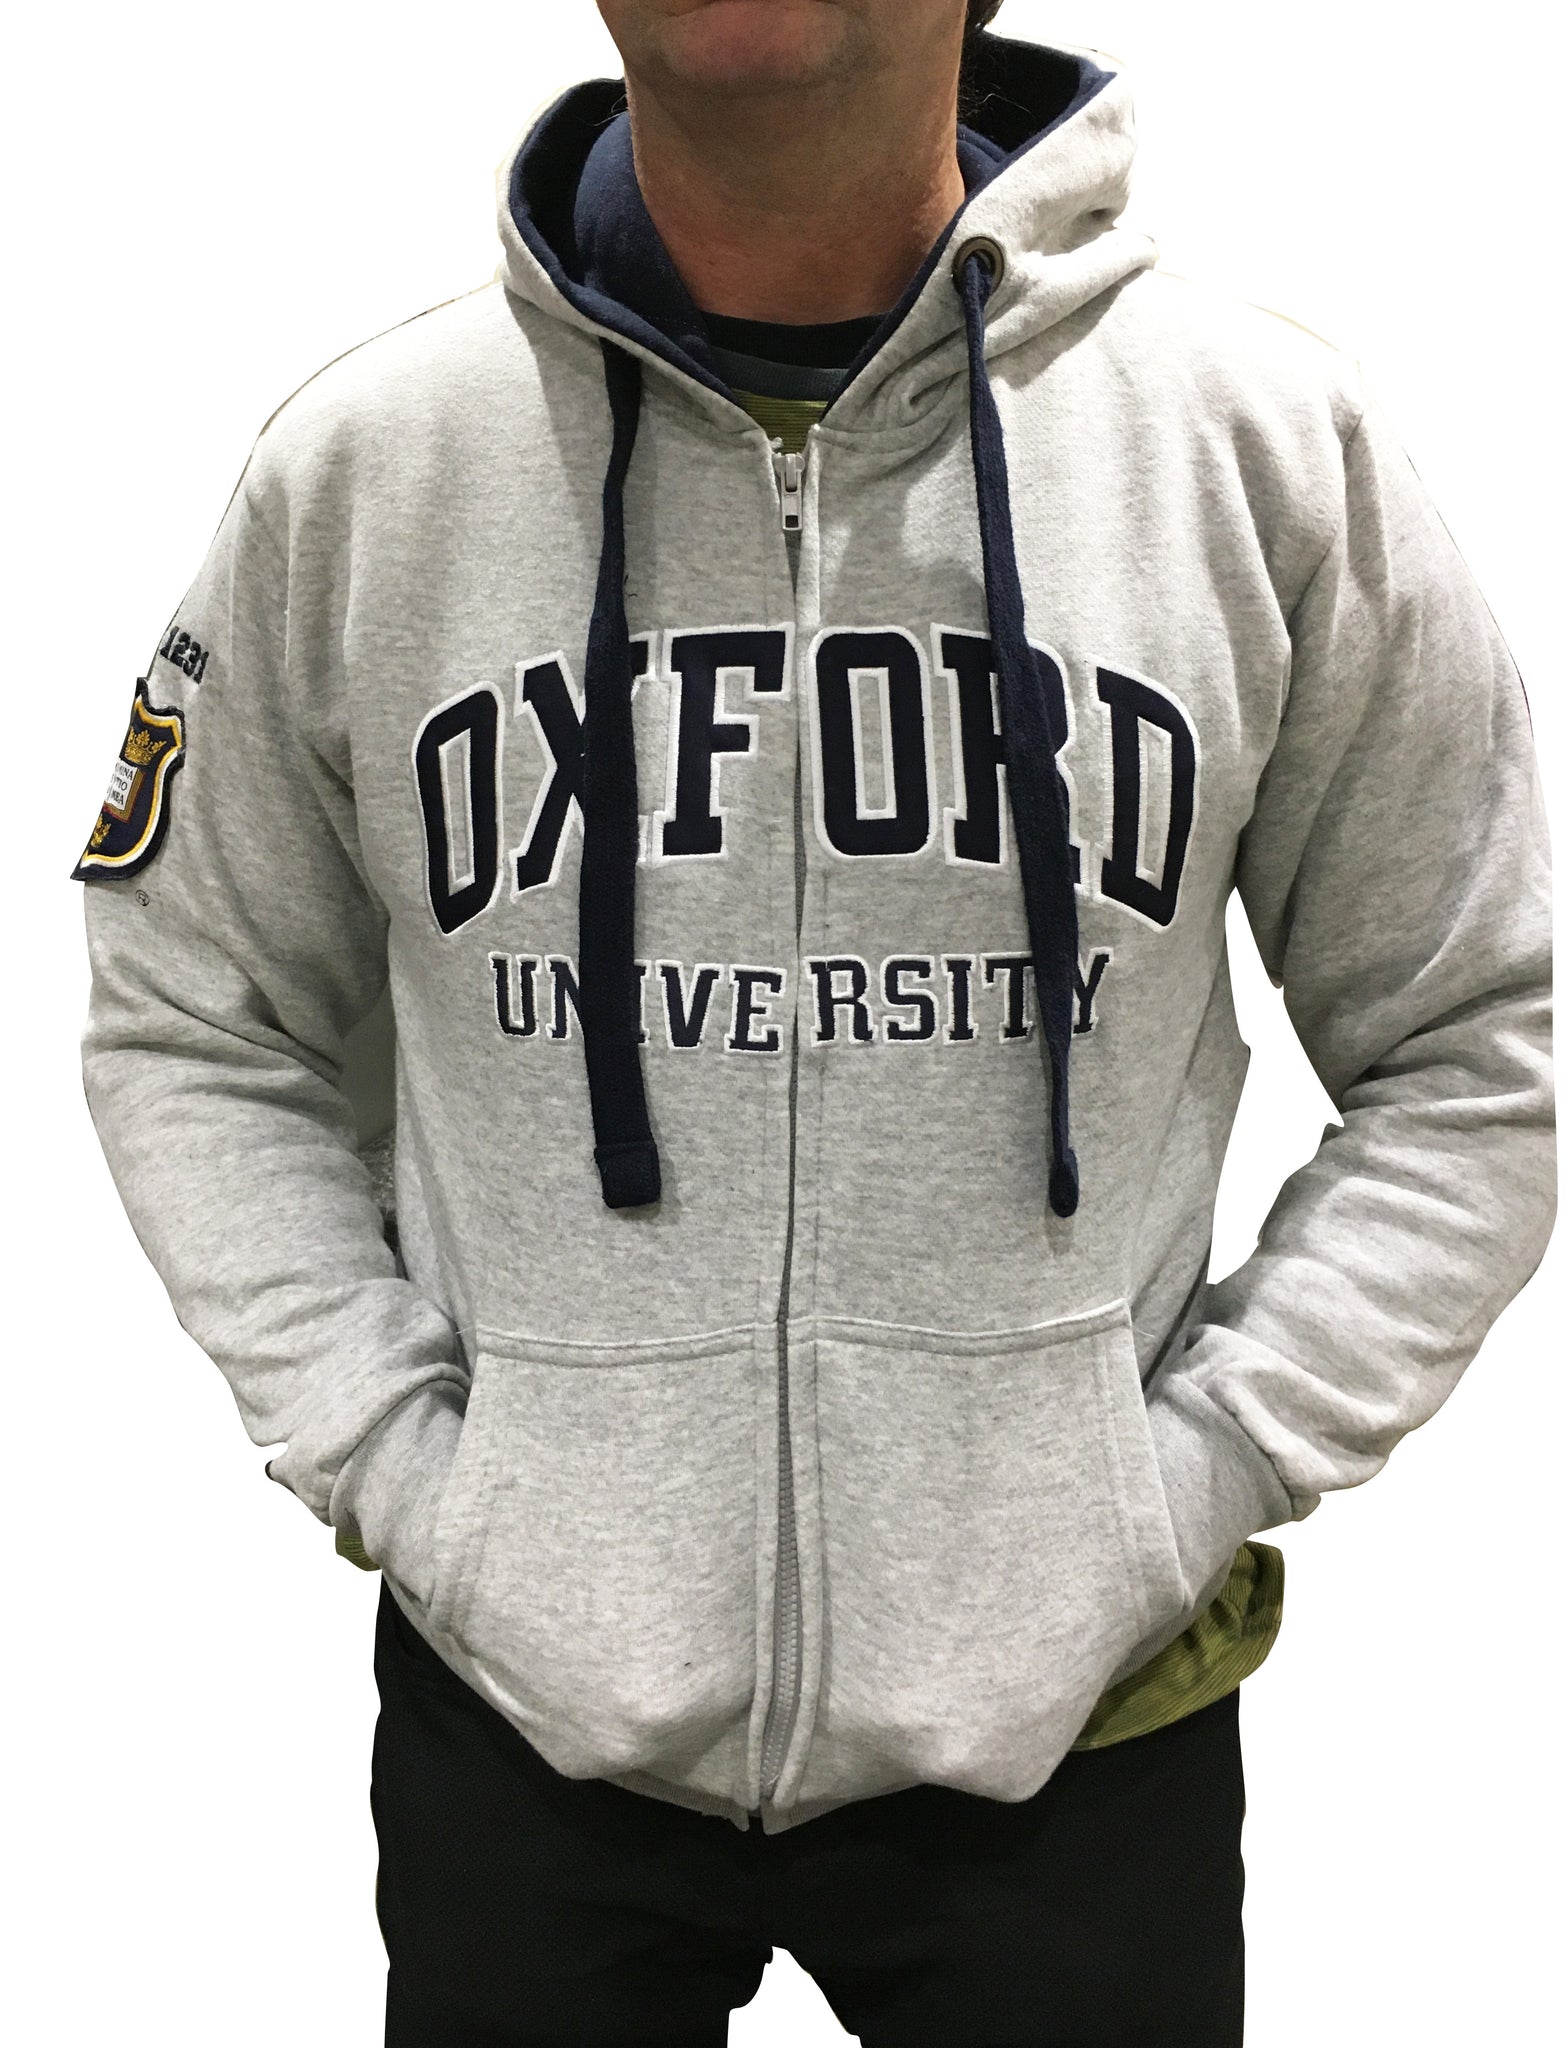 Oxford University Zipped Embroidered Hoody - Grey - Official Apparel of the Famous University of Oxford